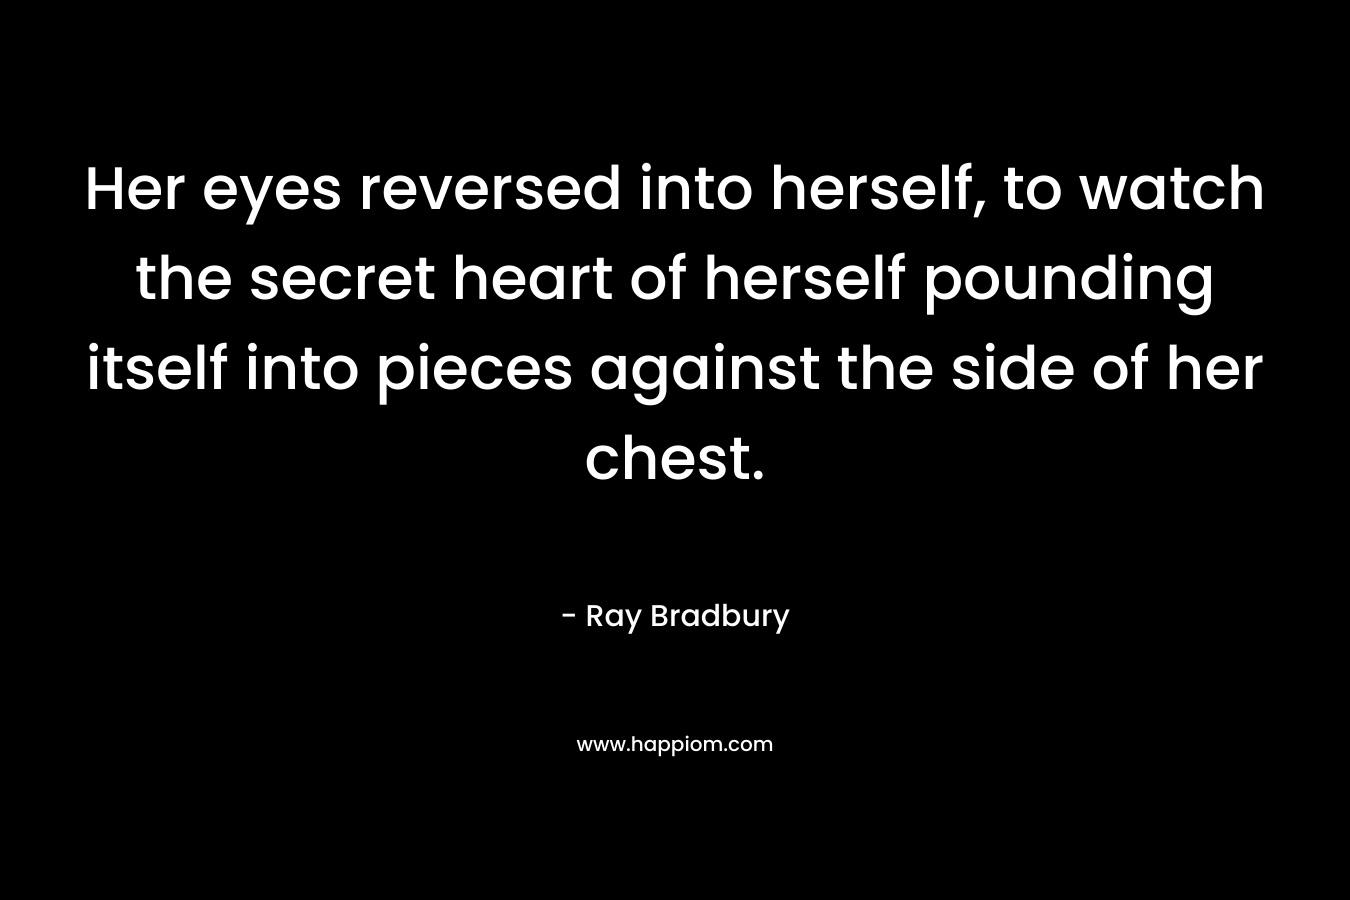 Her eyes reversed into herself, to watch the secret heart of herself pounding itself into pieces against the side of her chest.